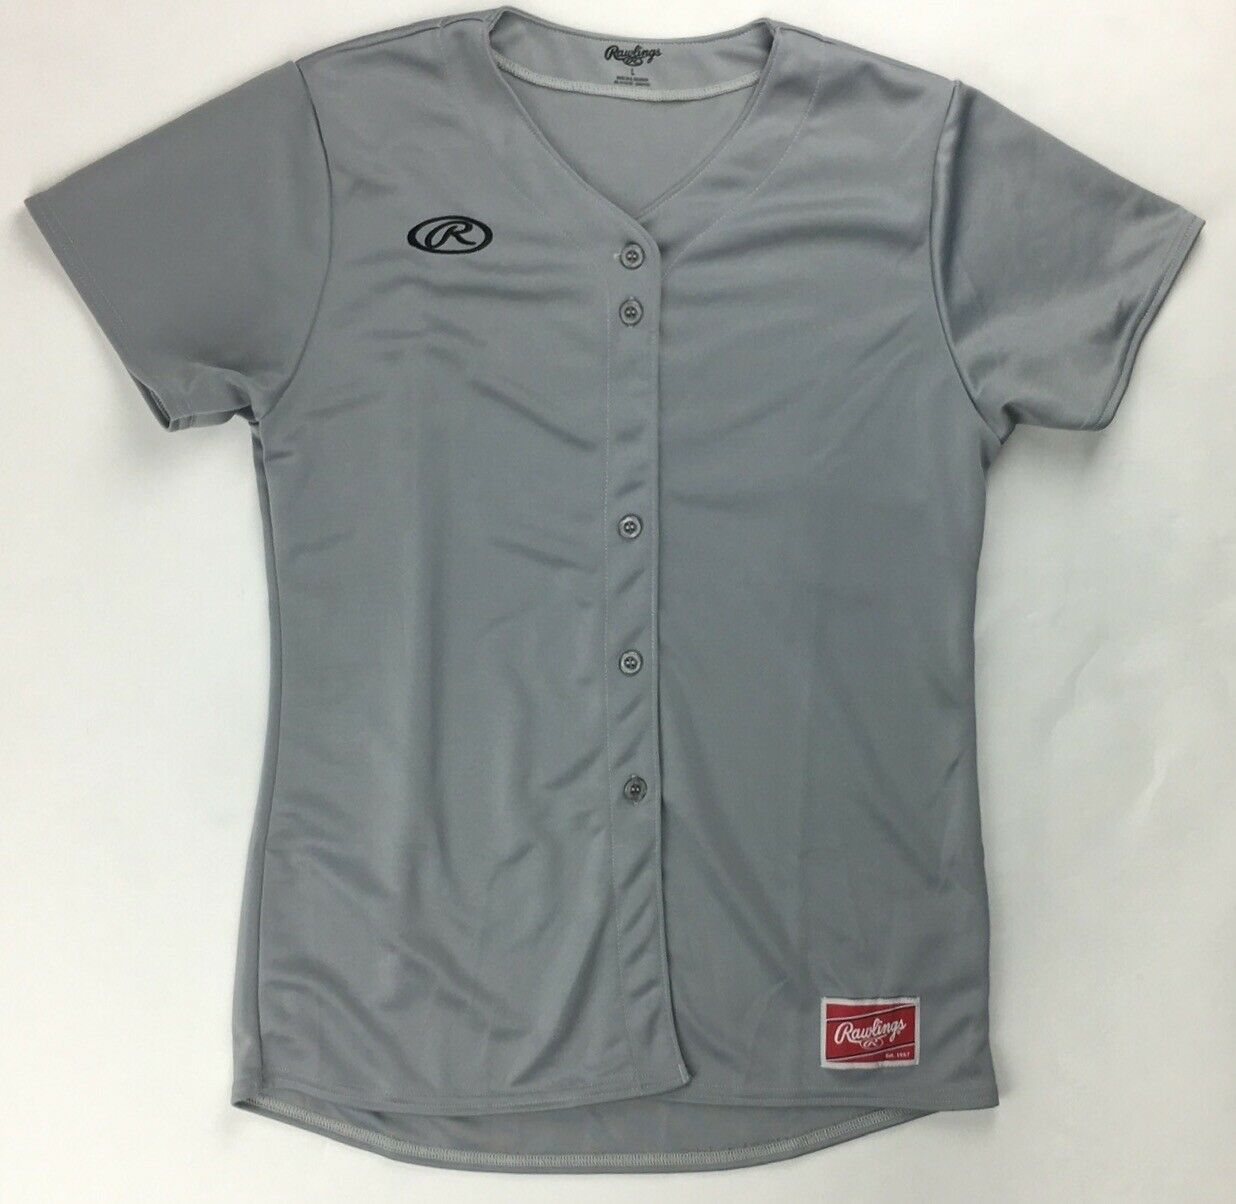 Primary image for Rawlings Performance Build Full Button Baseball Jersey Women's Large Grey